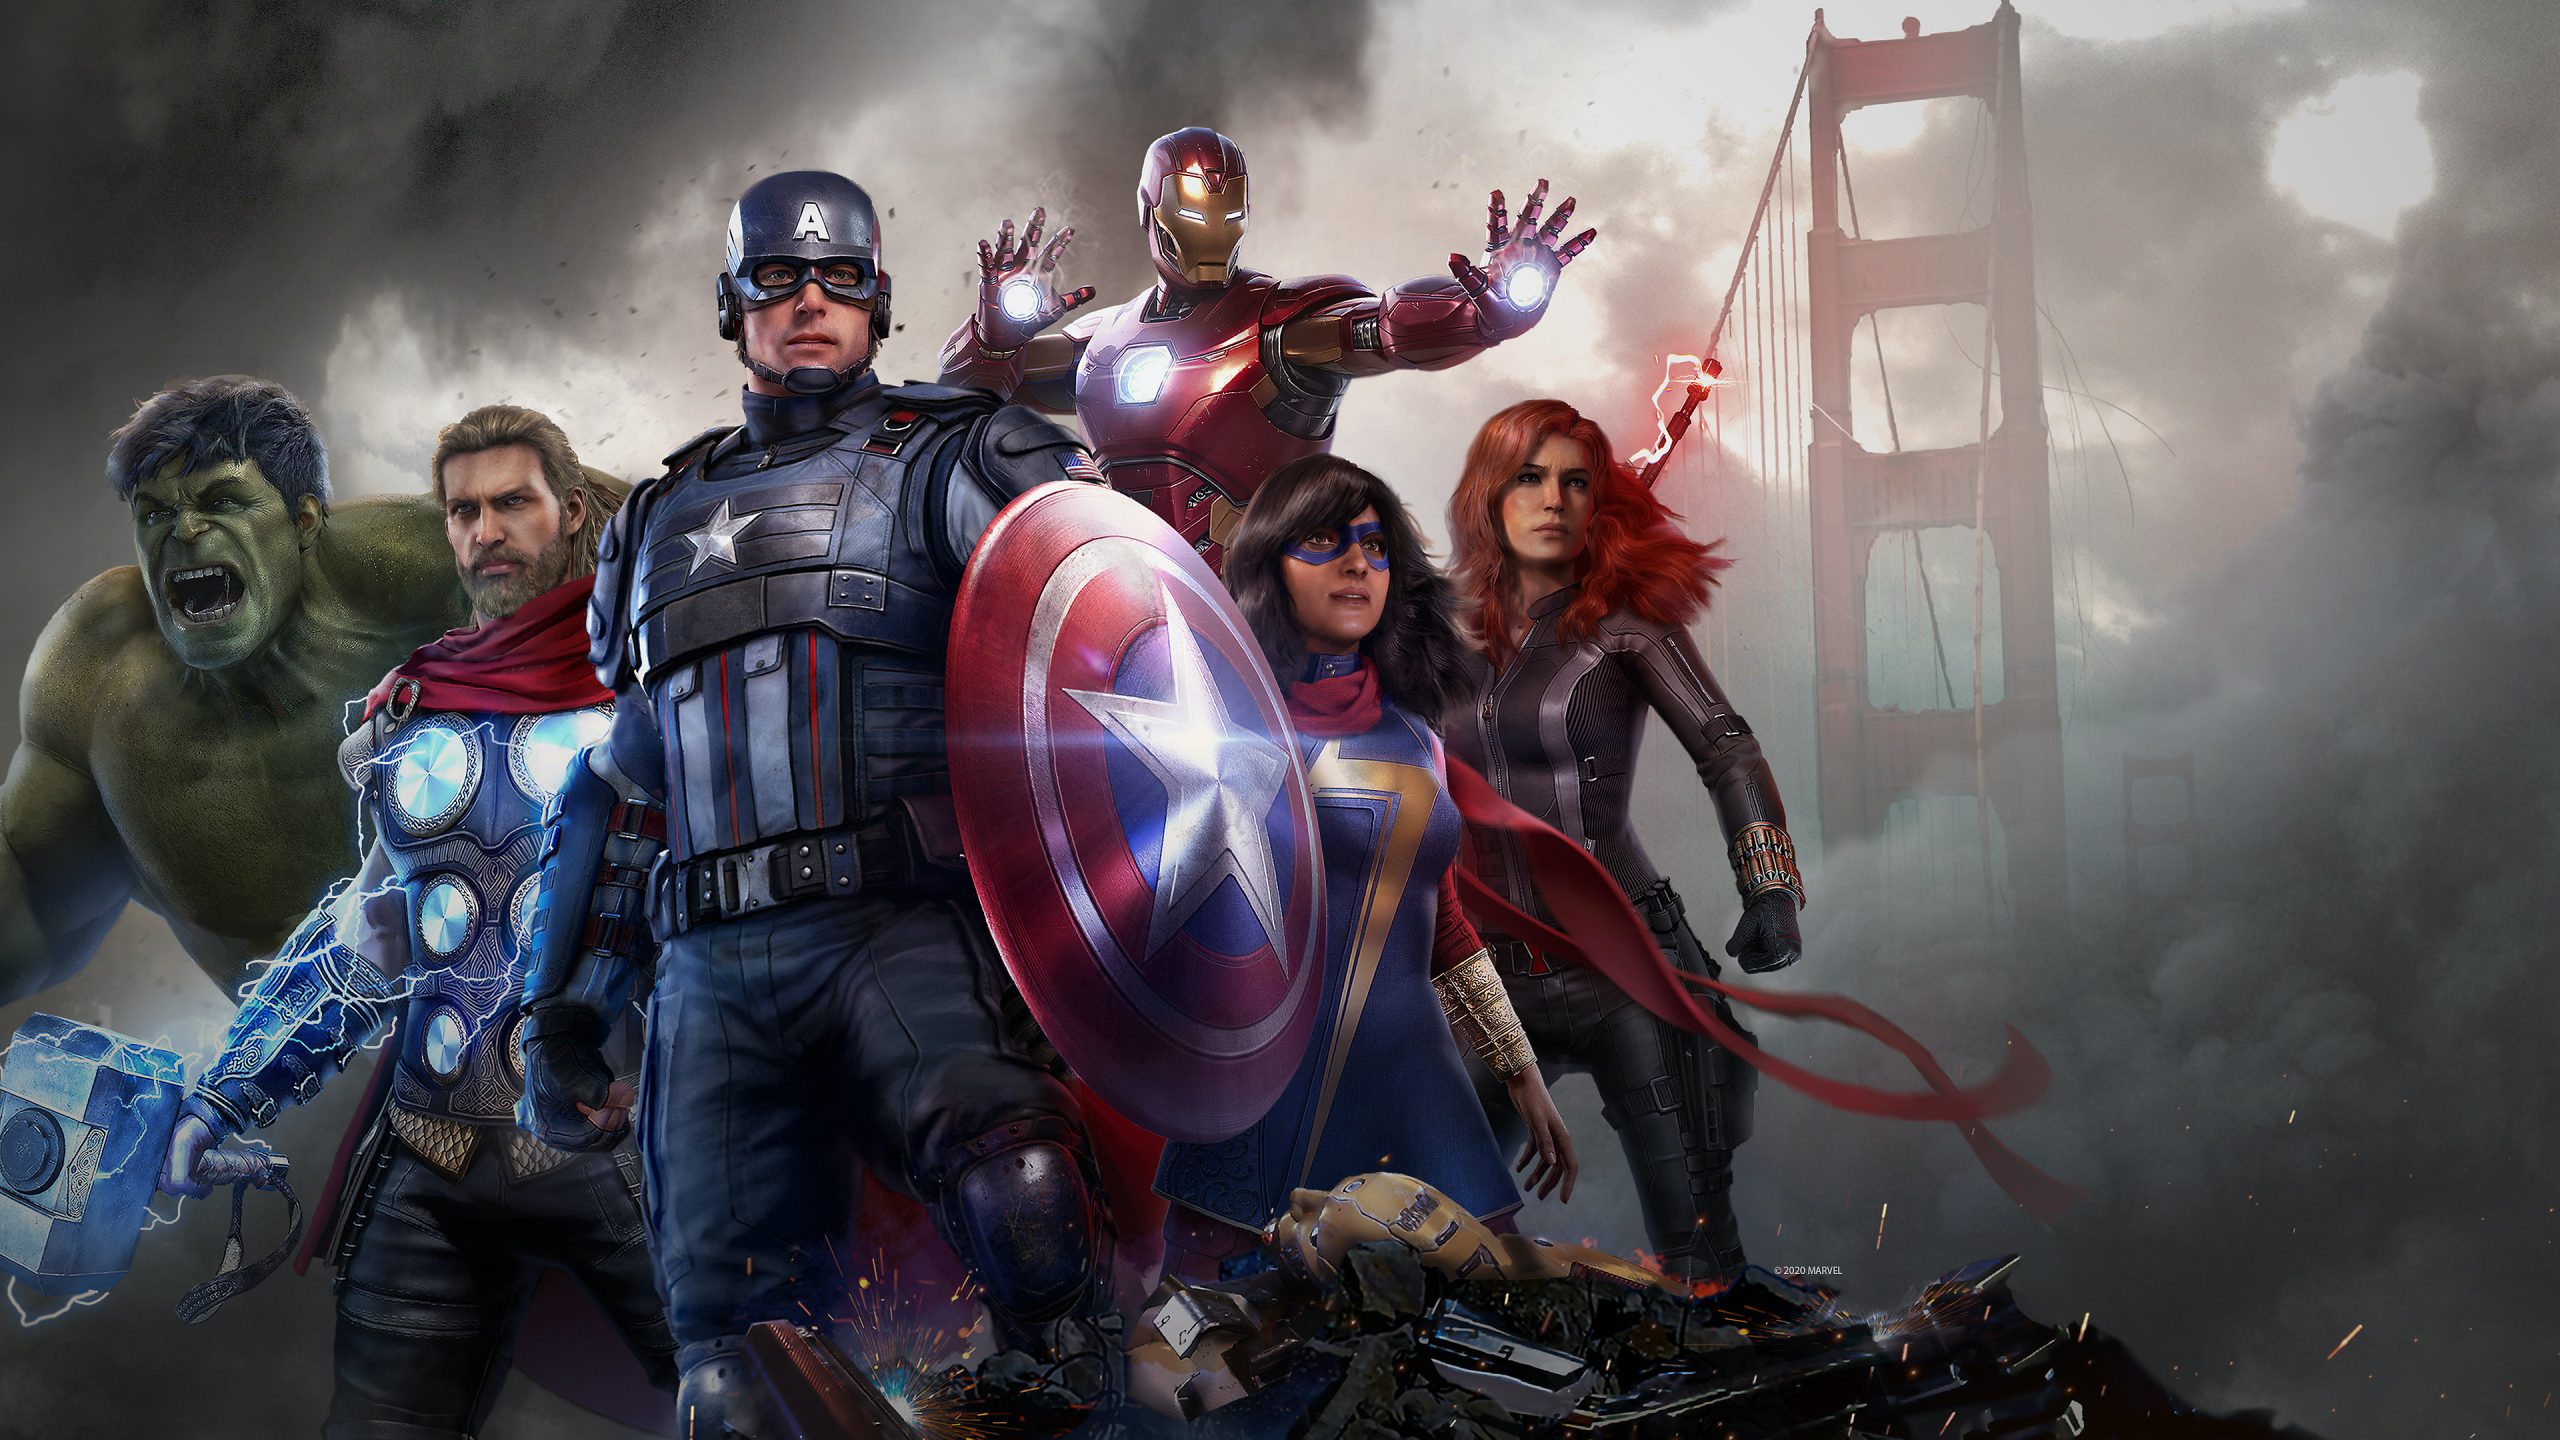 How The Marvel’s Avengers Game Could Change The Superhero Genre…For Better Or Worse